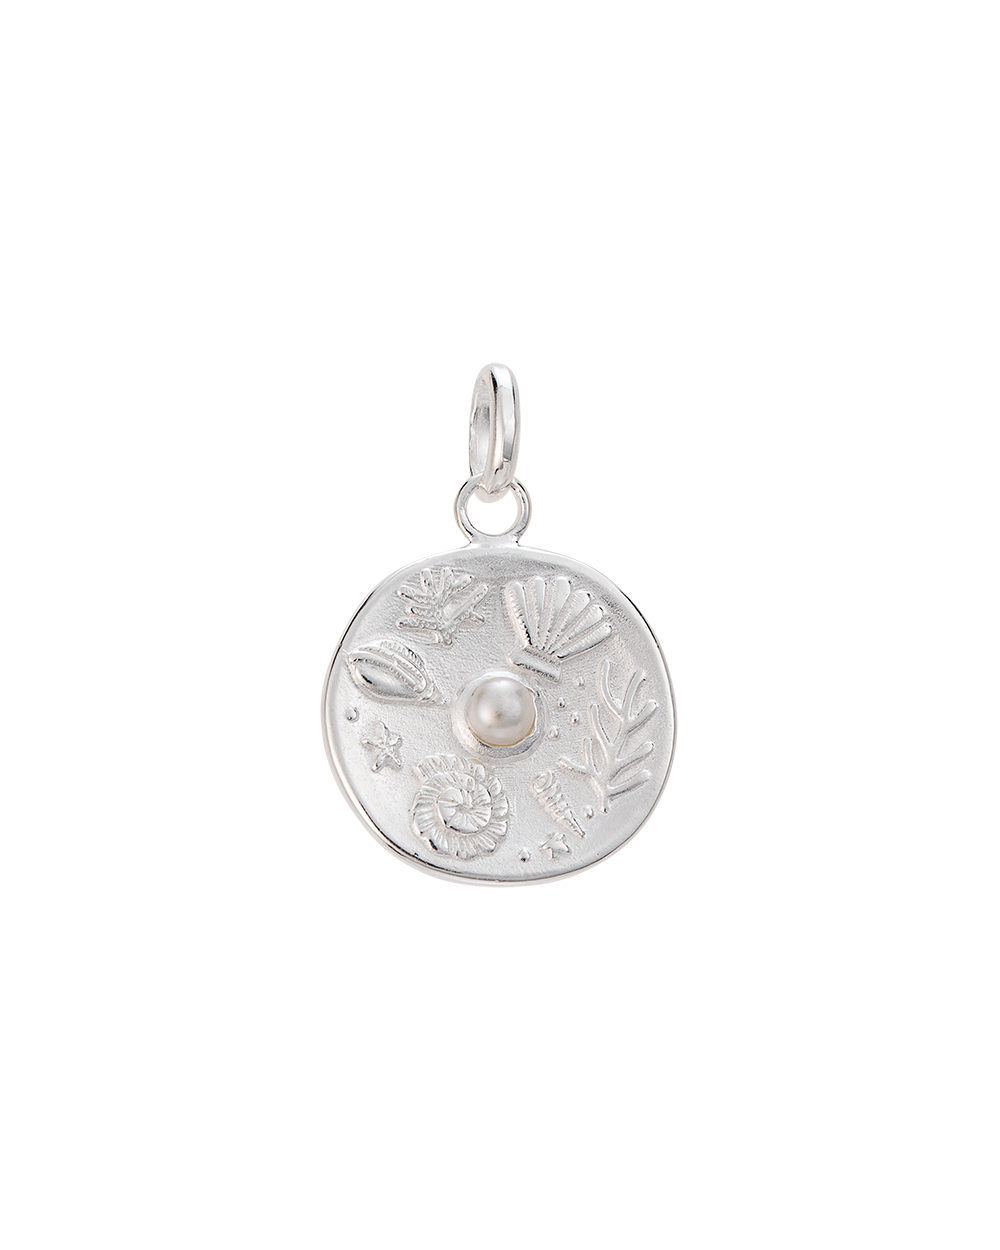 TINY BY THE SEA COIN (STERLING SILVER) - IMAGE 1